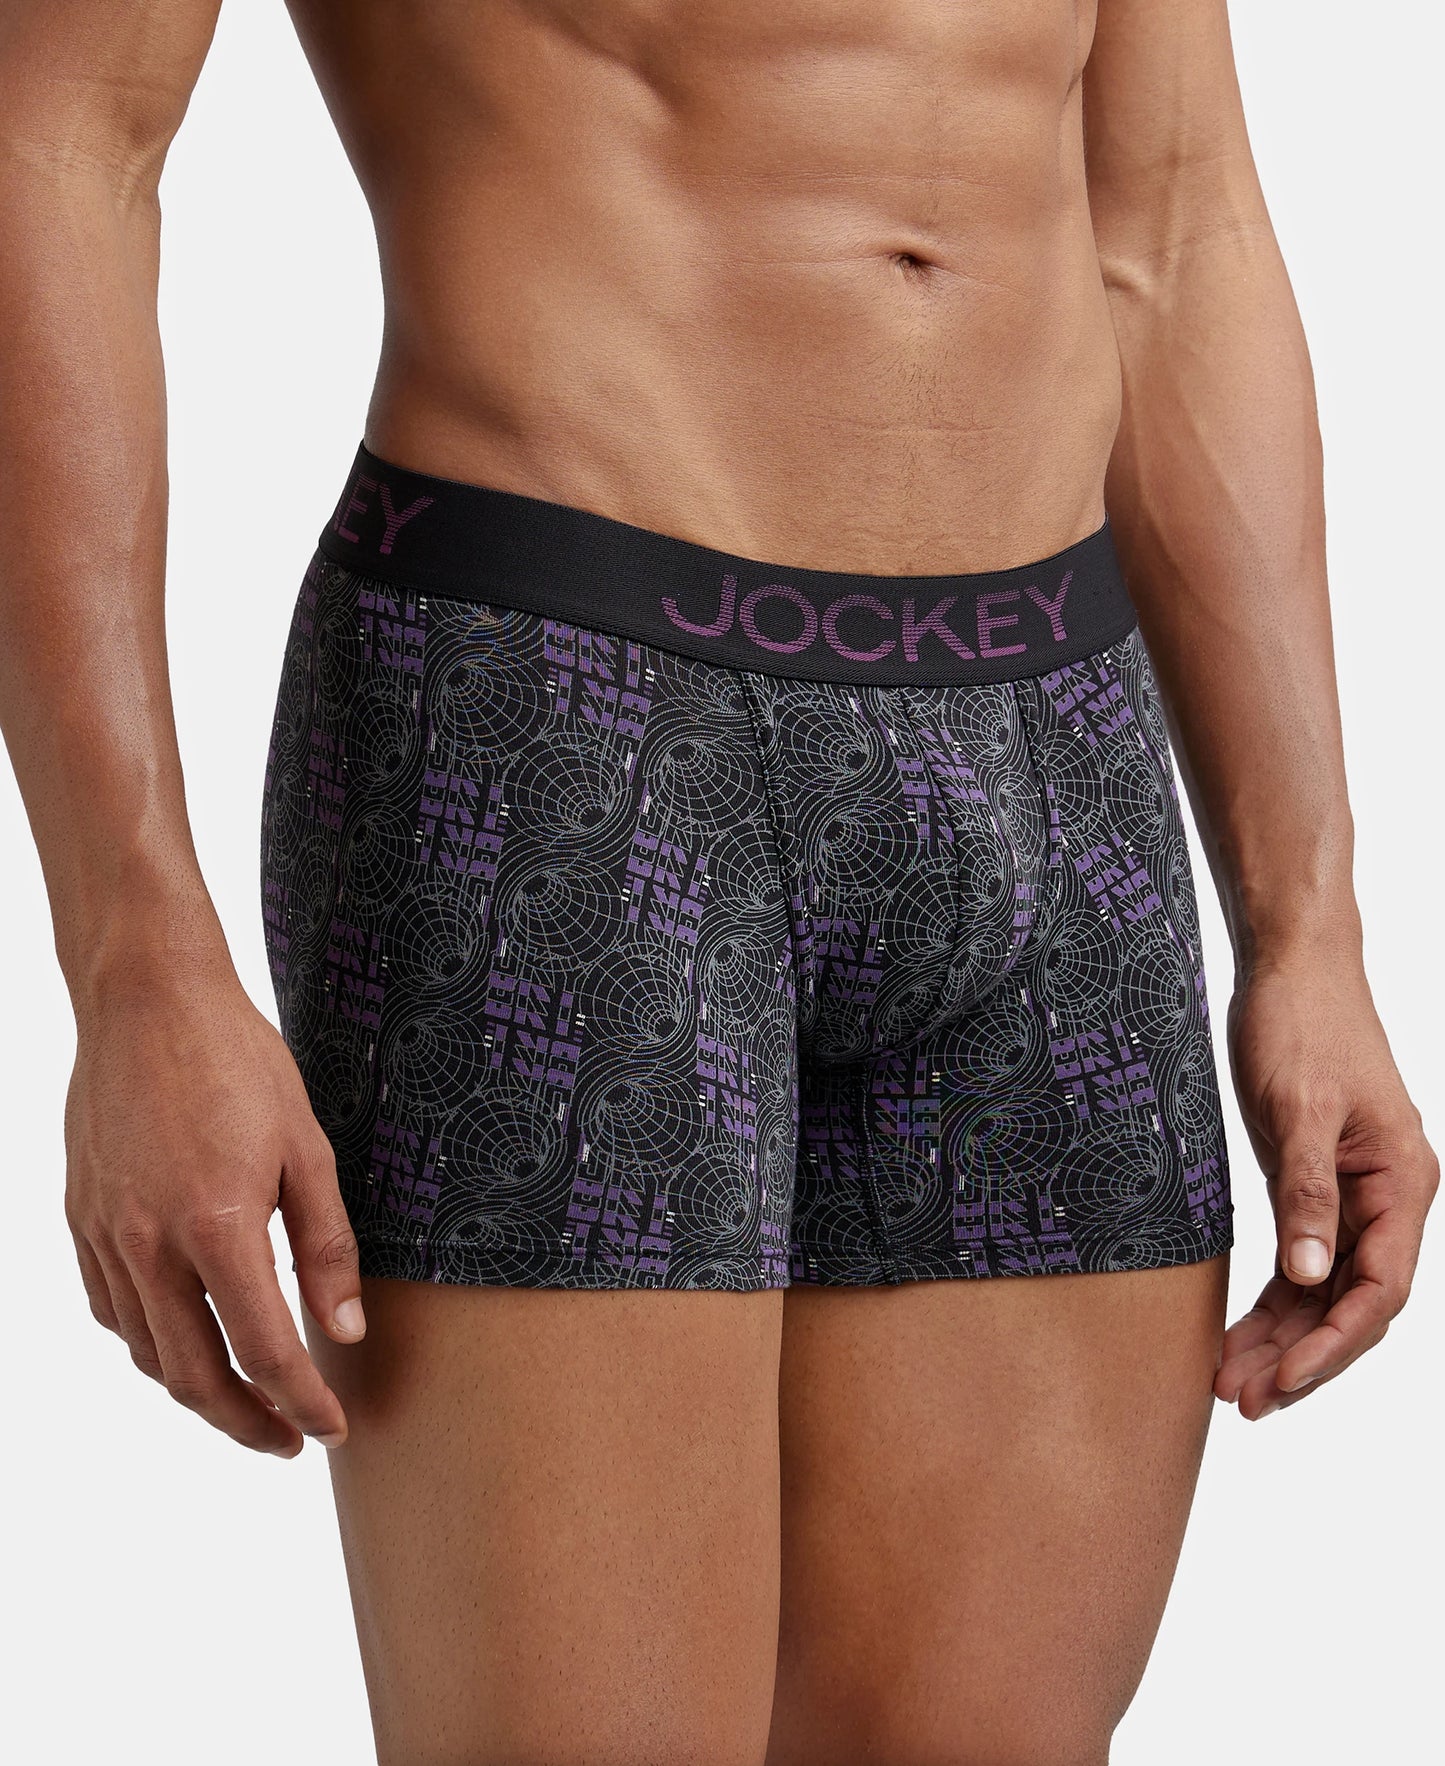 Super Combed Cotton Elastane Printed Trunk with Ultrasoft Waistband - Black & Plum-2